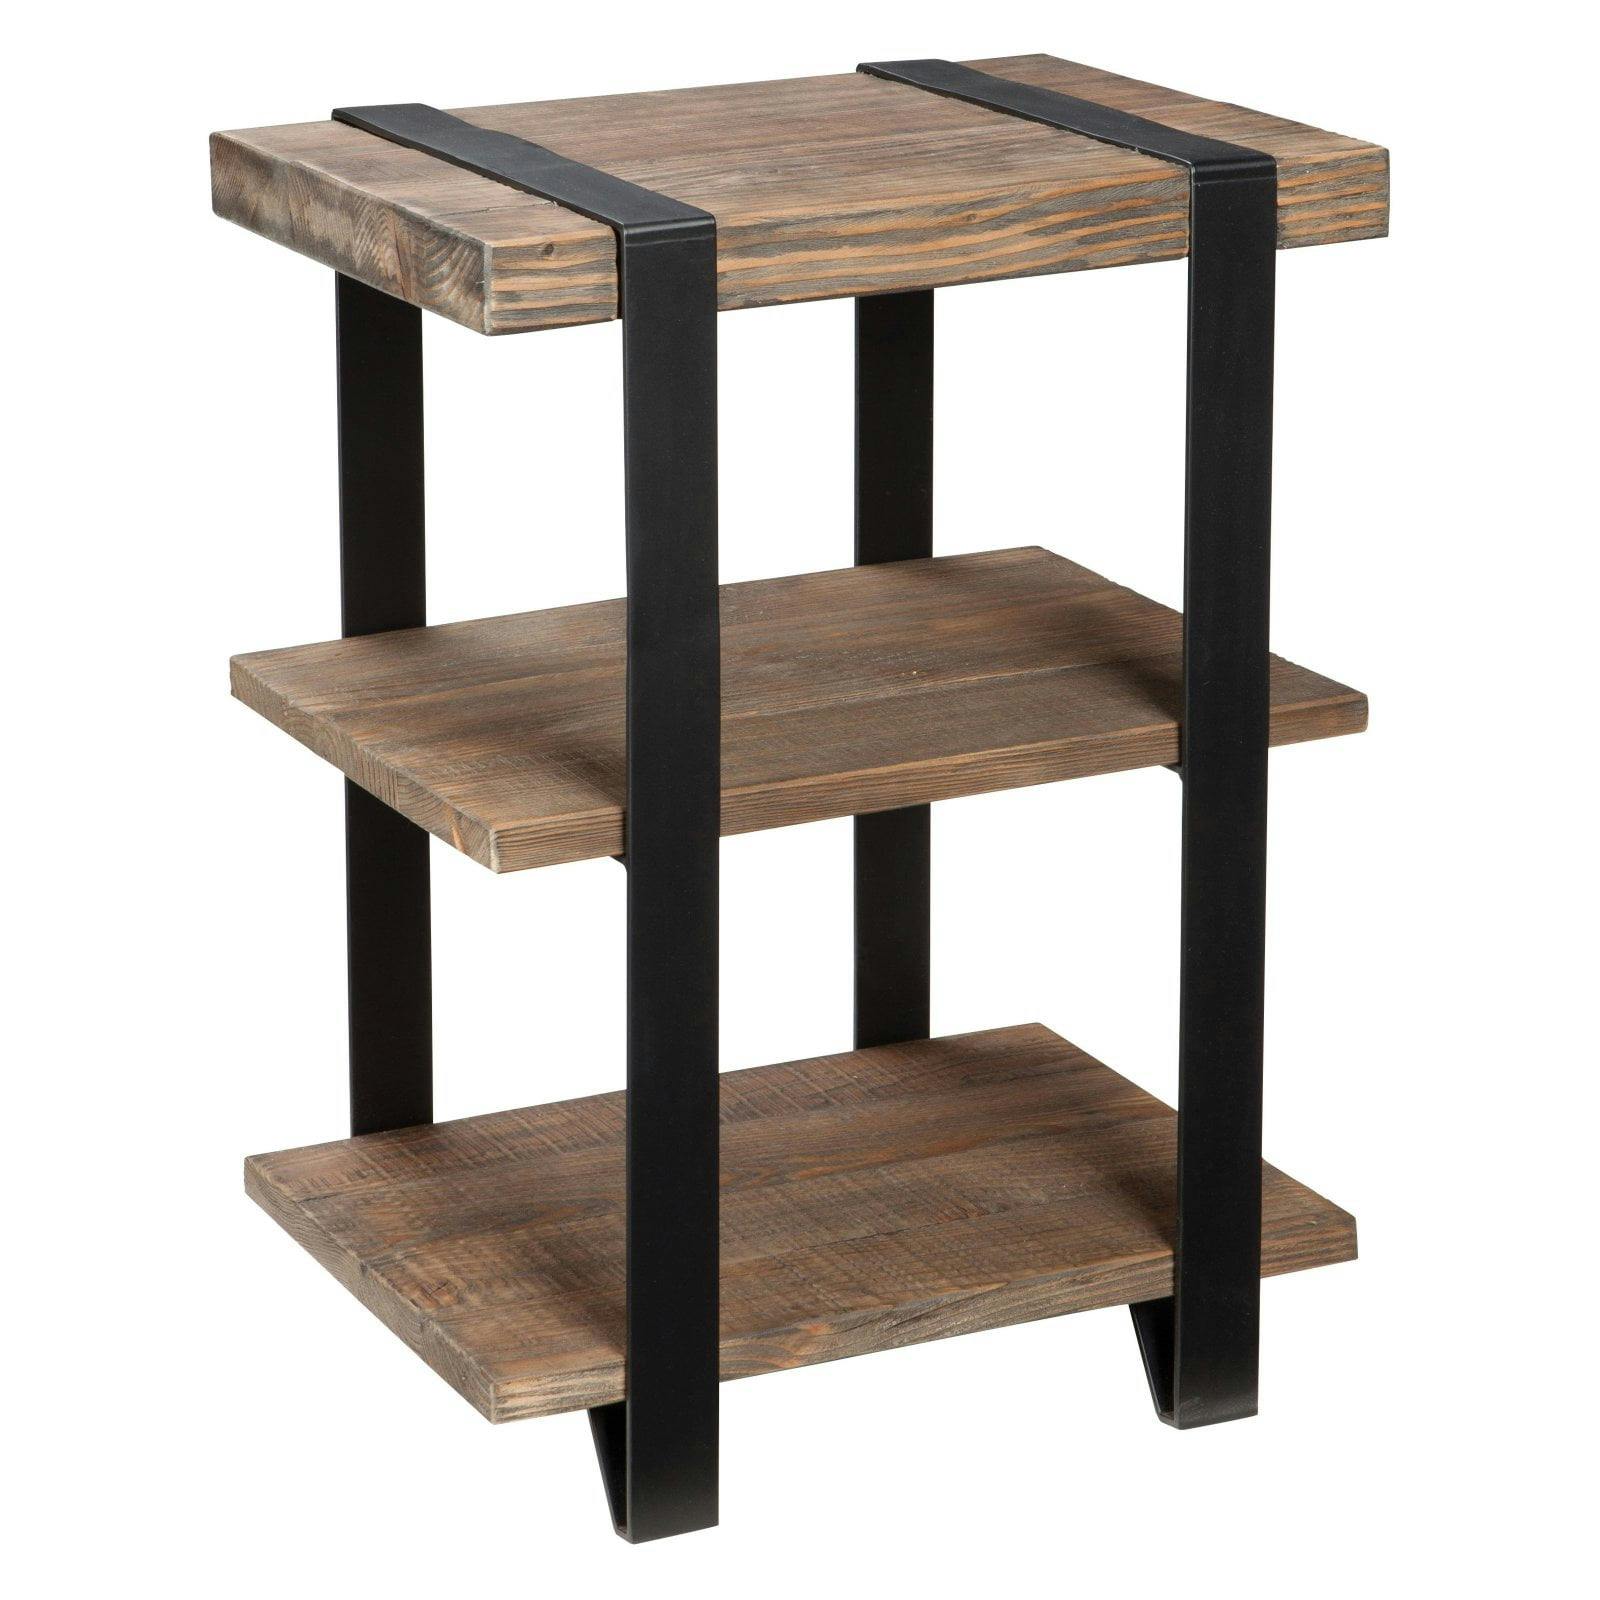 31" Reclaimed Wood and Metal Industrial End Table with Dual Shelves